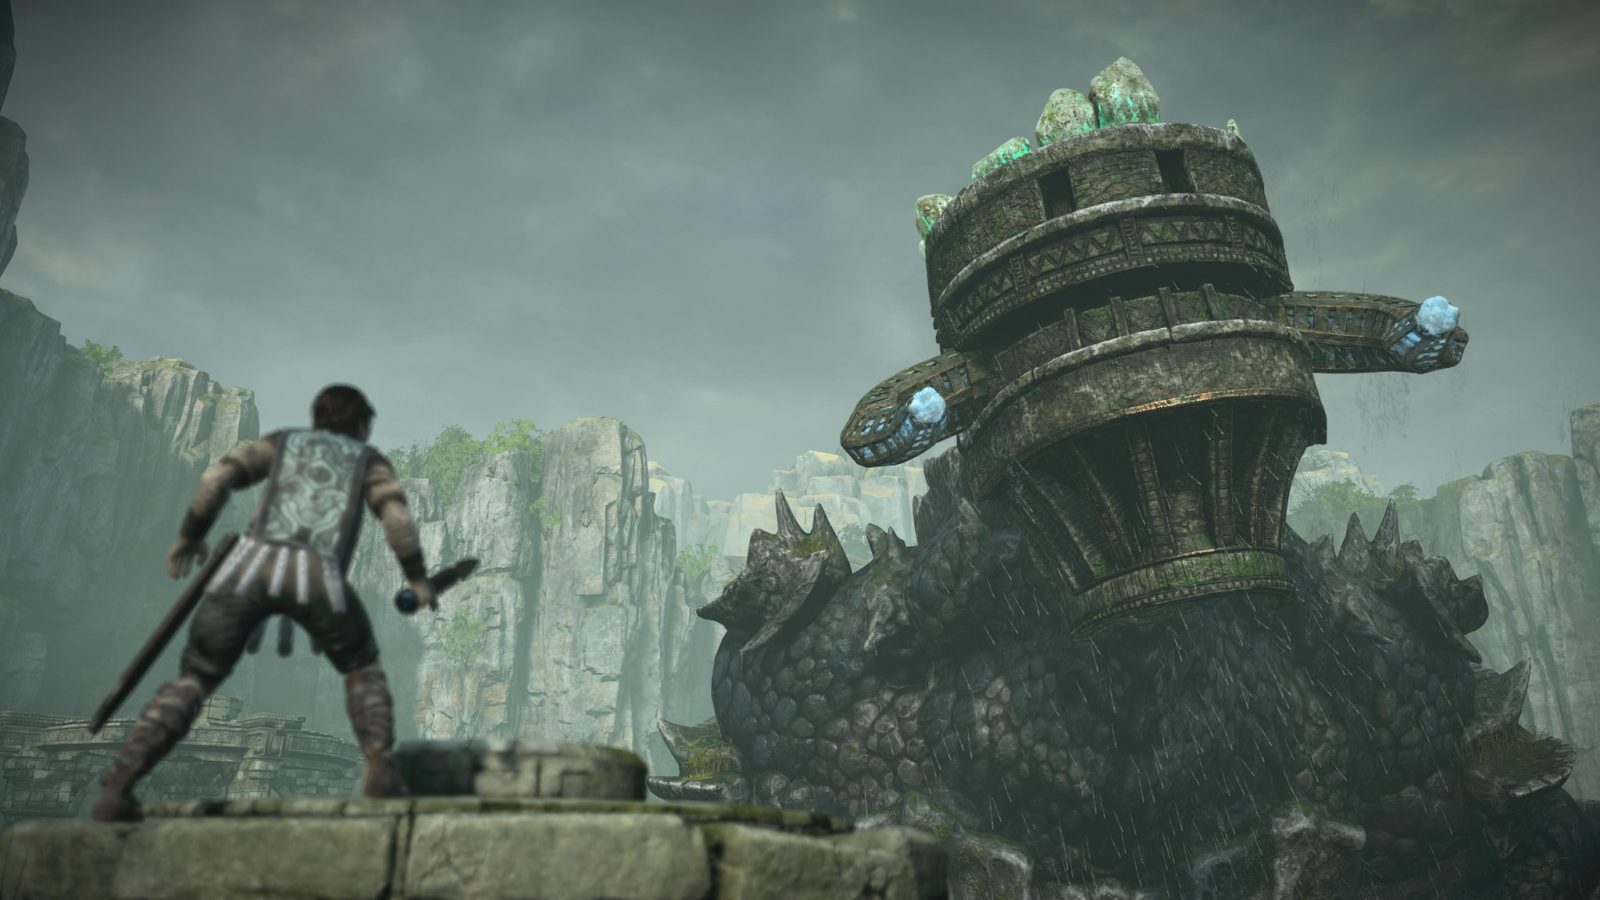 Shadow of the Colossus' Review: Should You Buy Video Game Remakes